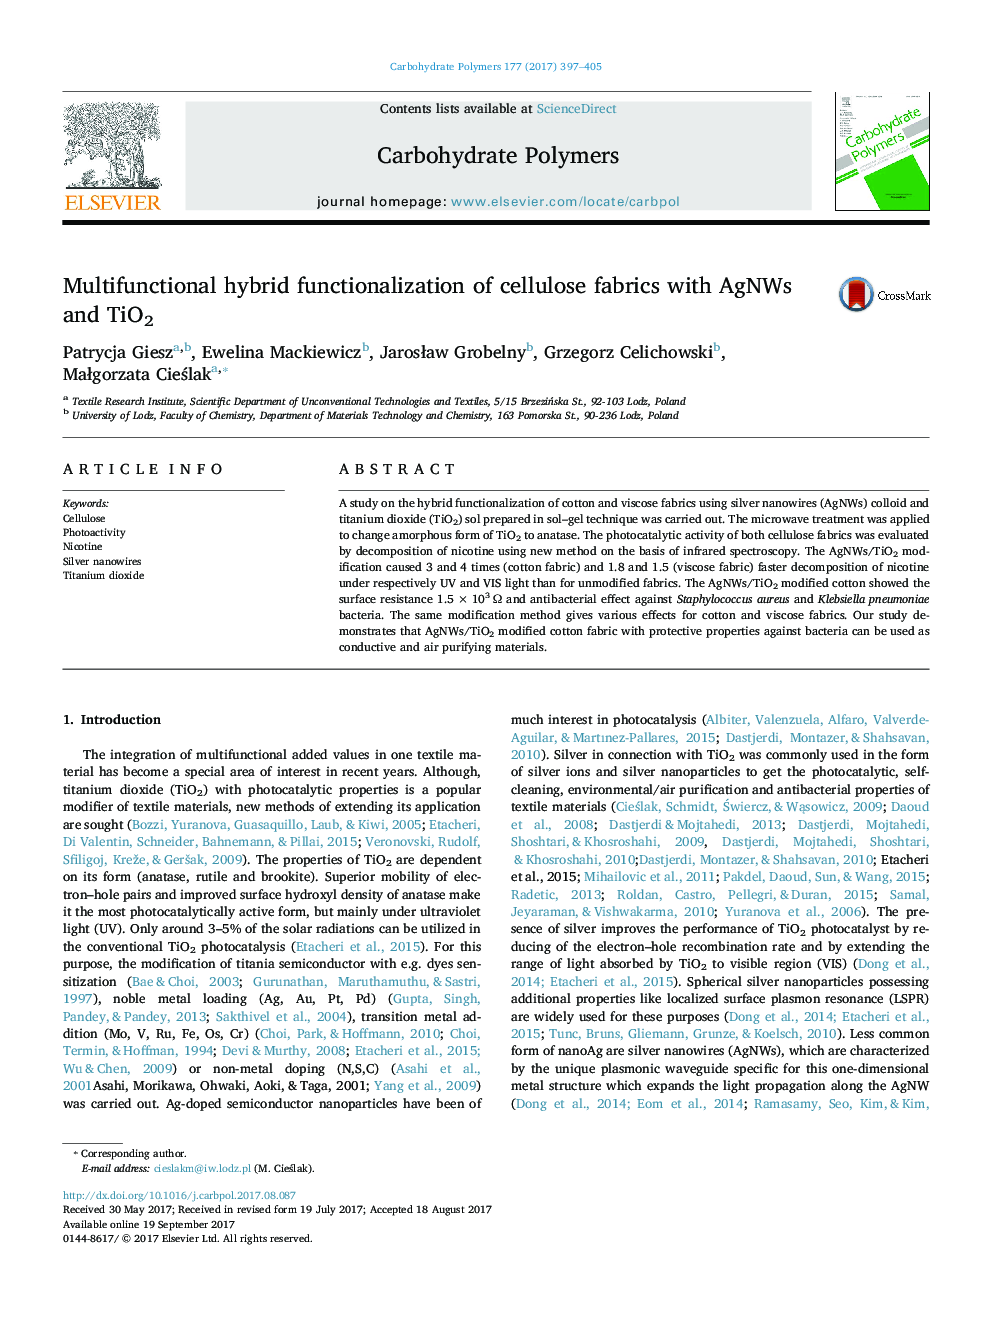 Multifunctional hybrid functionalization of cellulose fabrics with AgNWs and TiO2